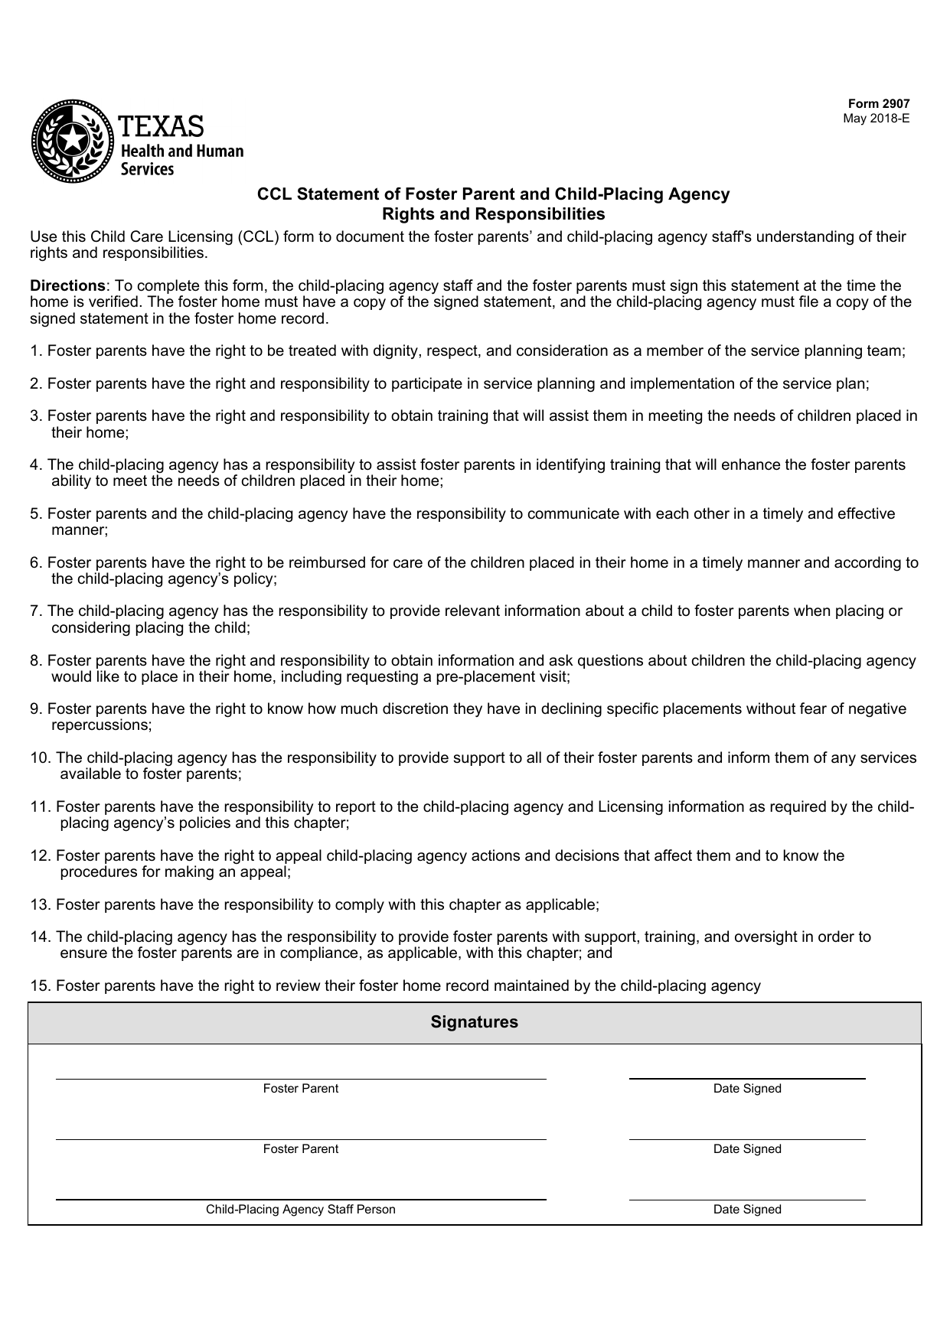 Form 2907 Ccl Statement of Foster Parent and Child-Placing Agency Rights and Responsibilities - Texas, Page 1